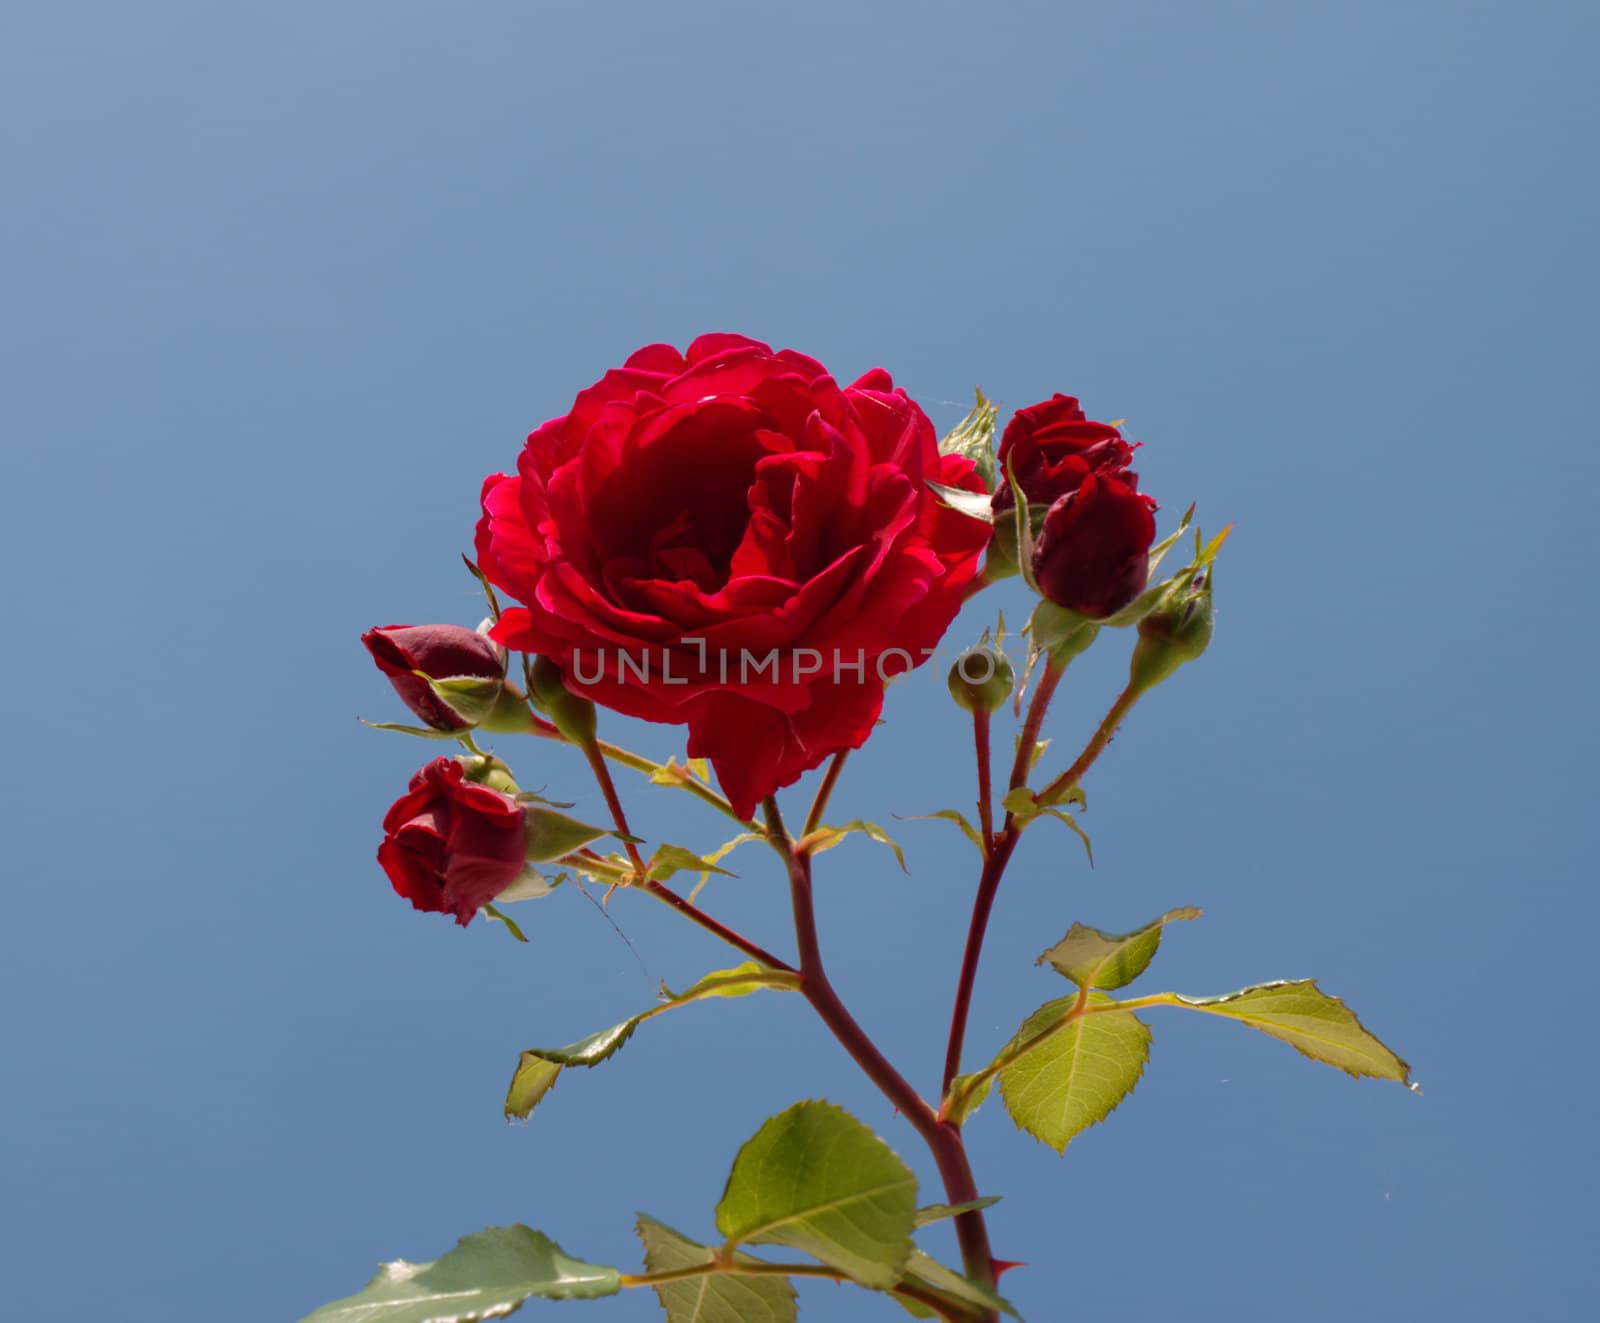 the rose with buds against blue sky
